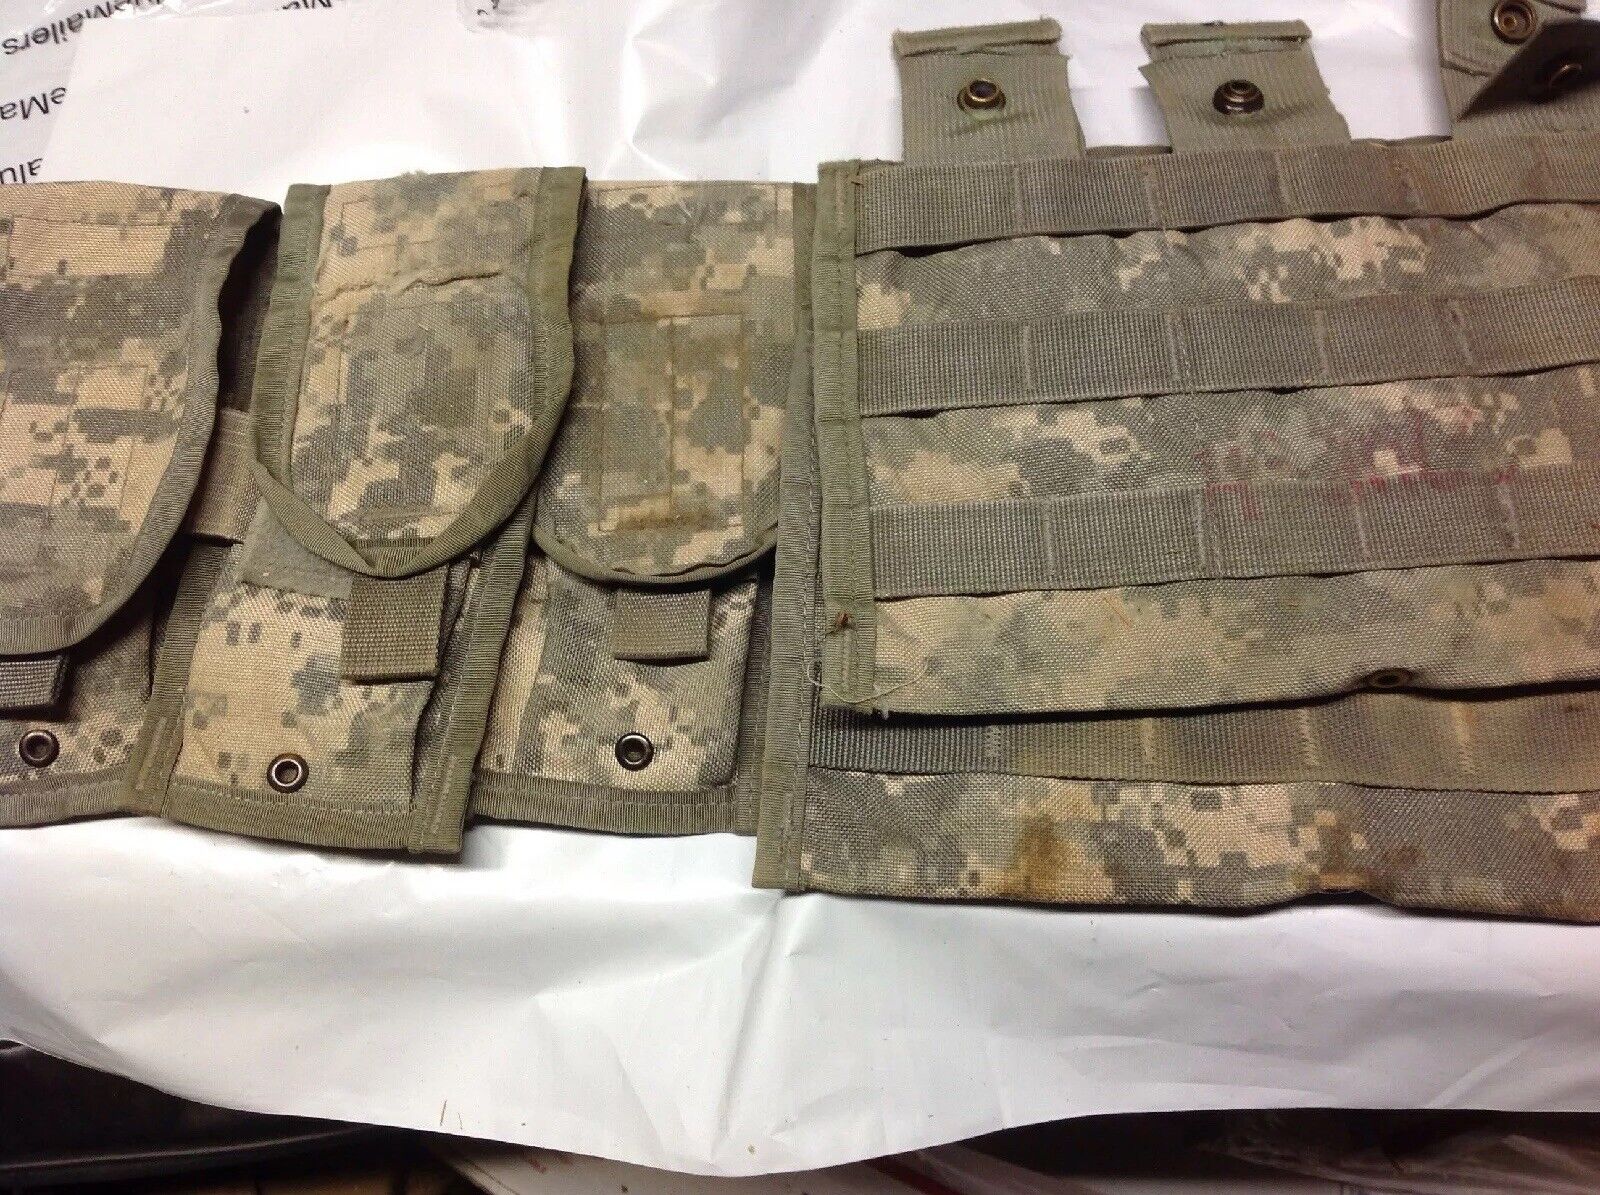 2. Three Mag ACU Pouches, 3 Double Mag ACU Pouches